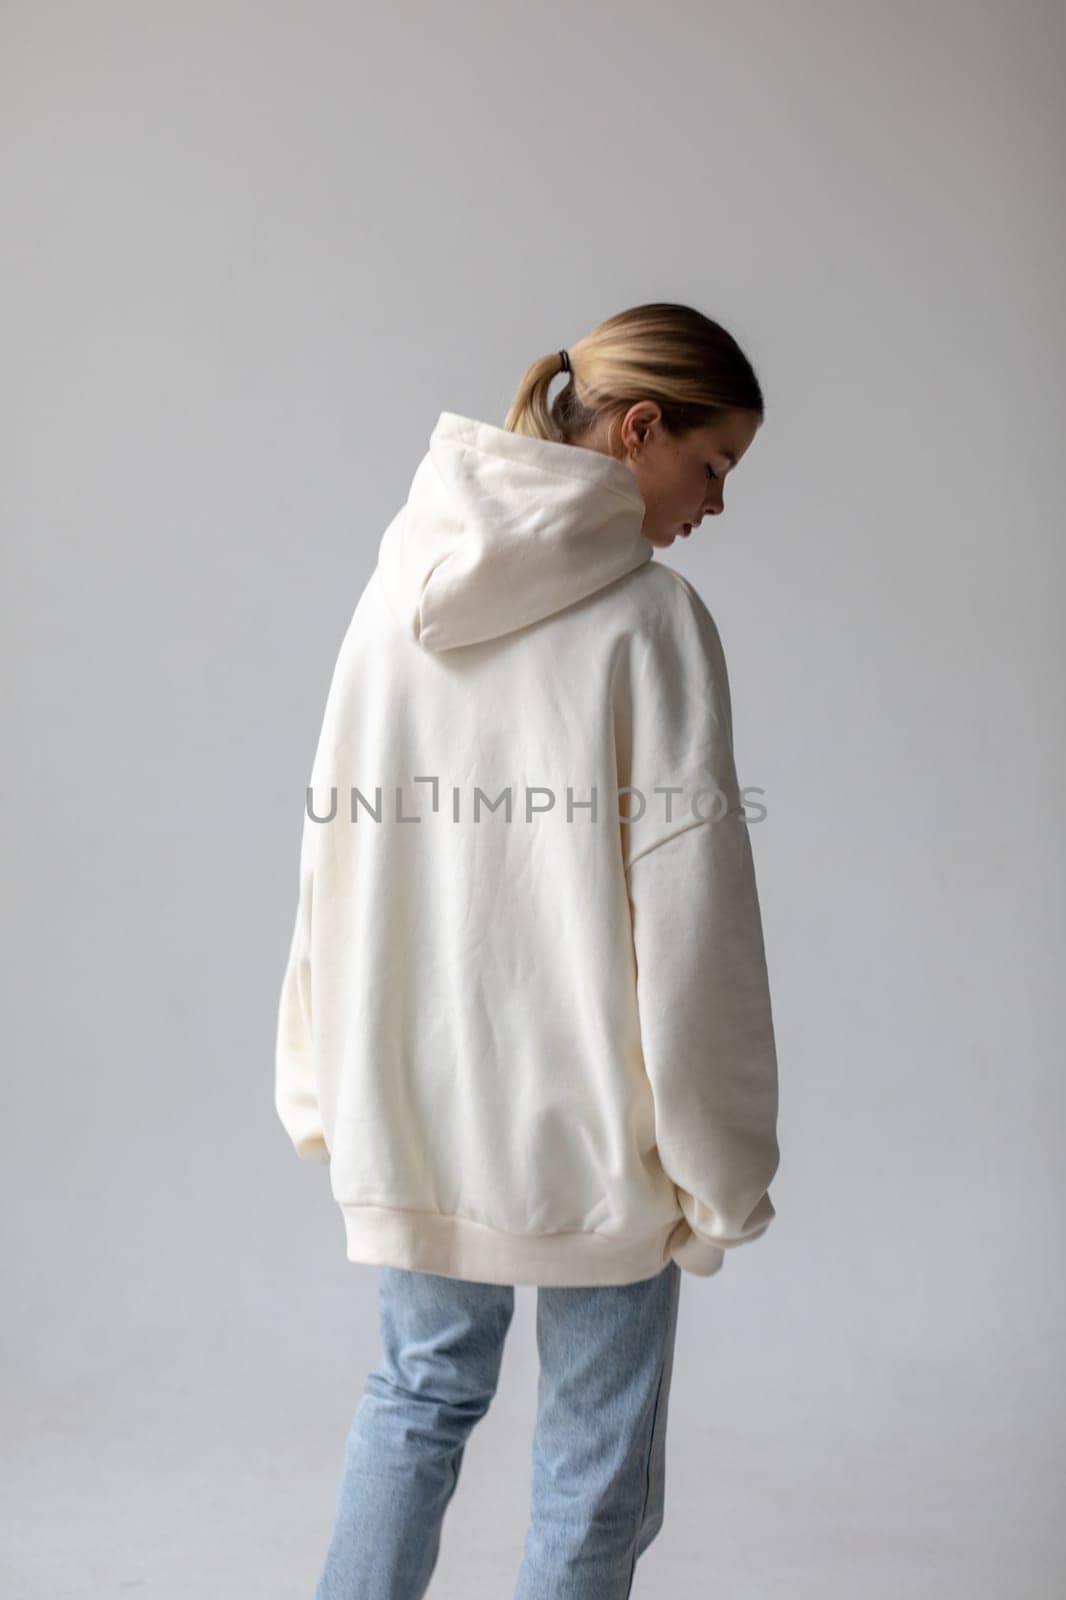 Beautiful blonde woman in a white hoodie and blue jeans posing on a white background by Freeman_Studio